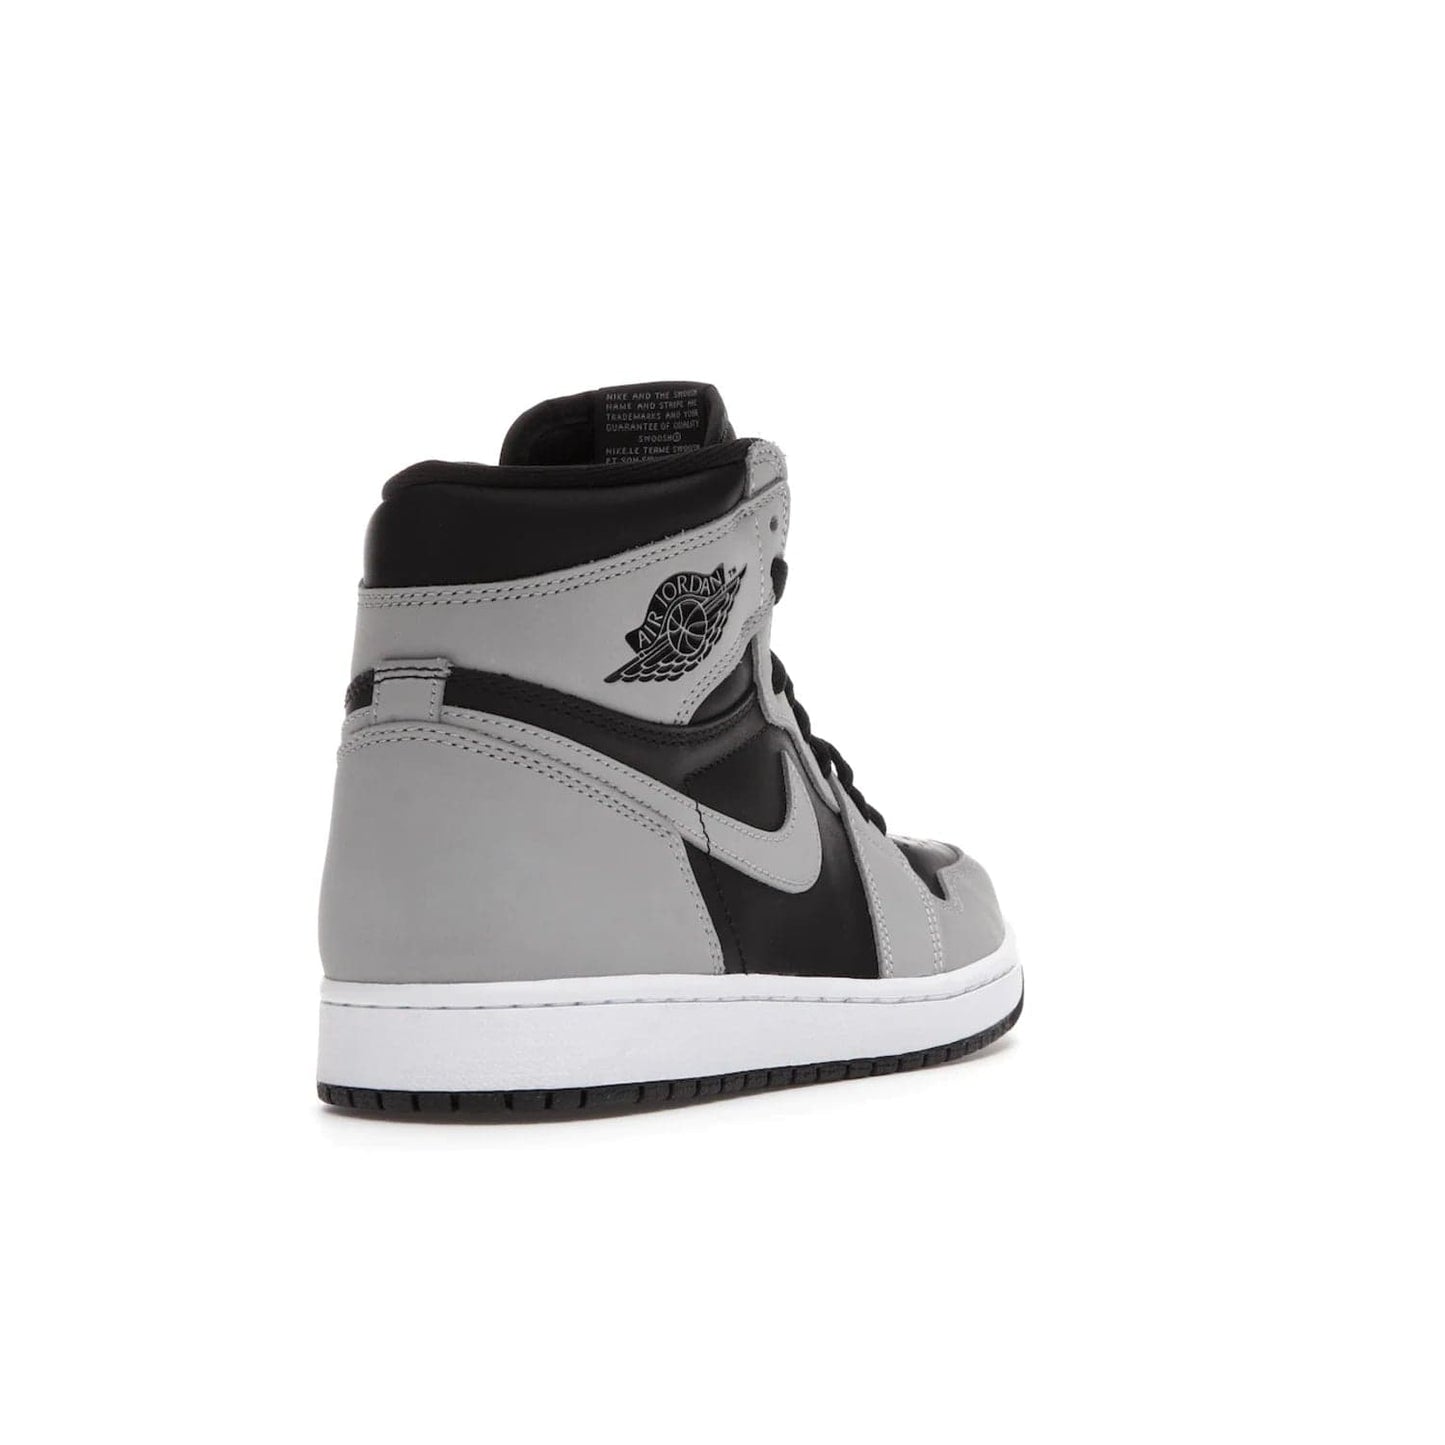 Jordan 1 Retro High Shadow 2.0 - Image 31 - Only at www.BallersClubKickz.com - #
Classic Air Jordan 1 Retro High Shadow 2.0 with black leather base and Light Smoke Grey overlays. Released in May 2021.